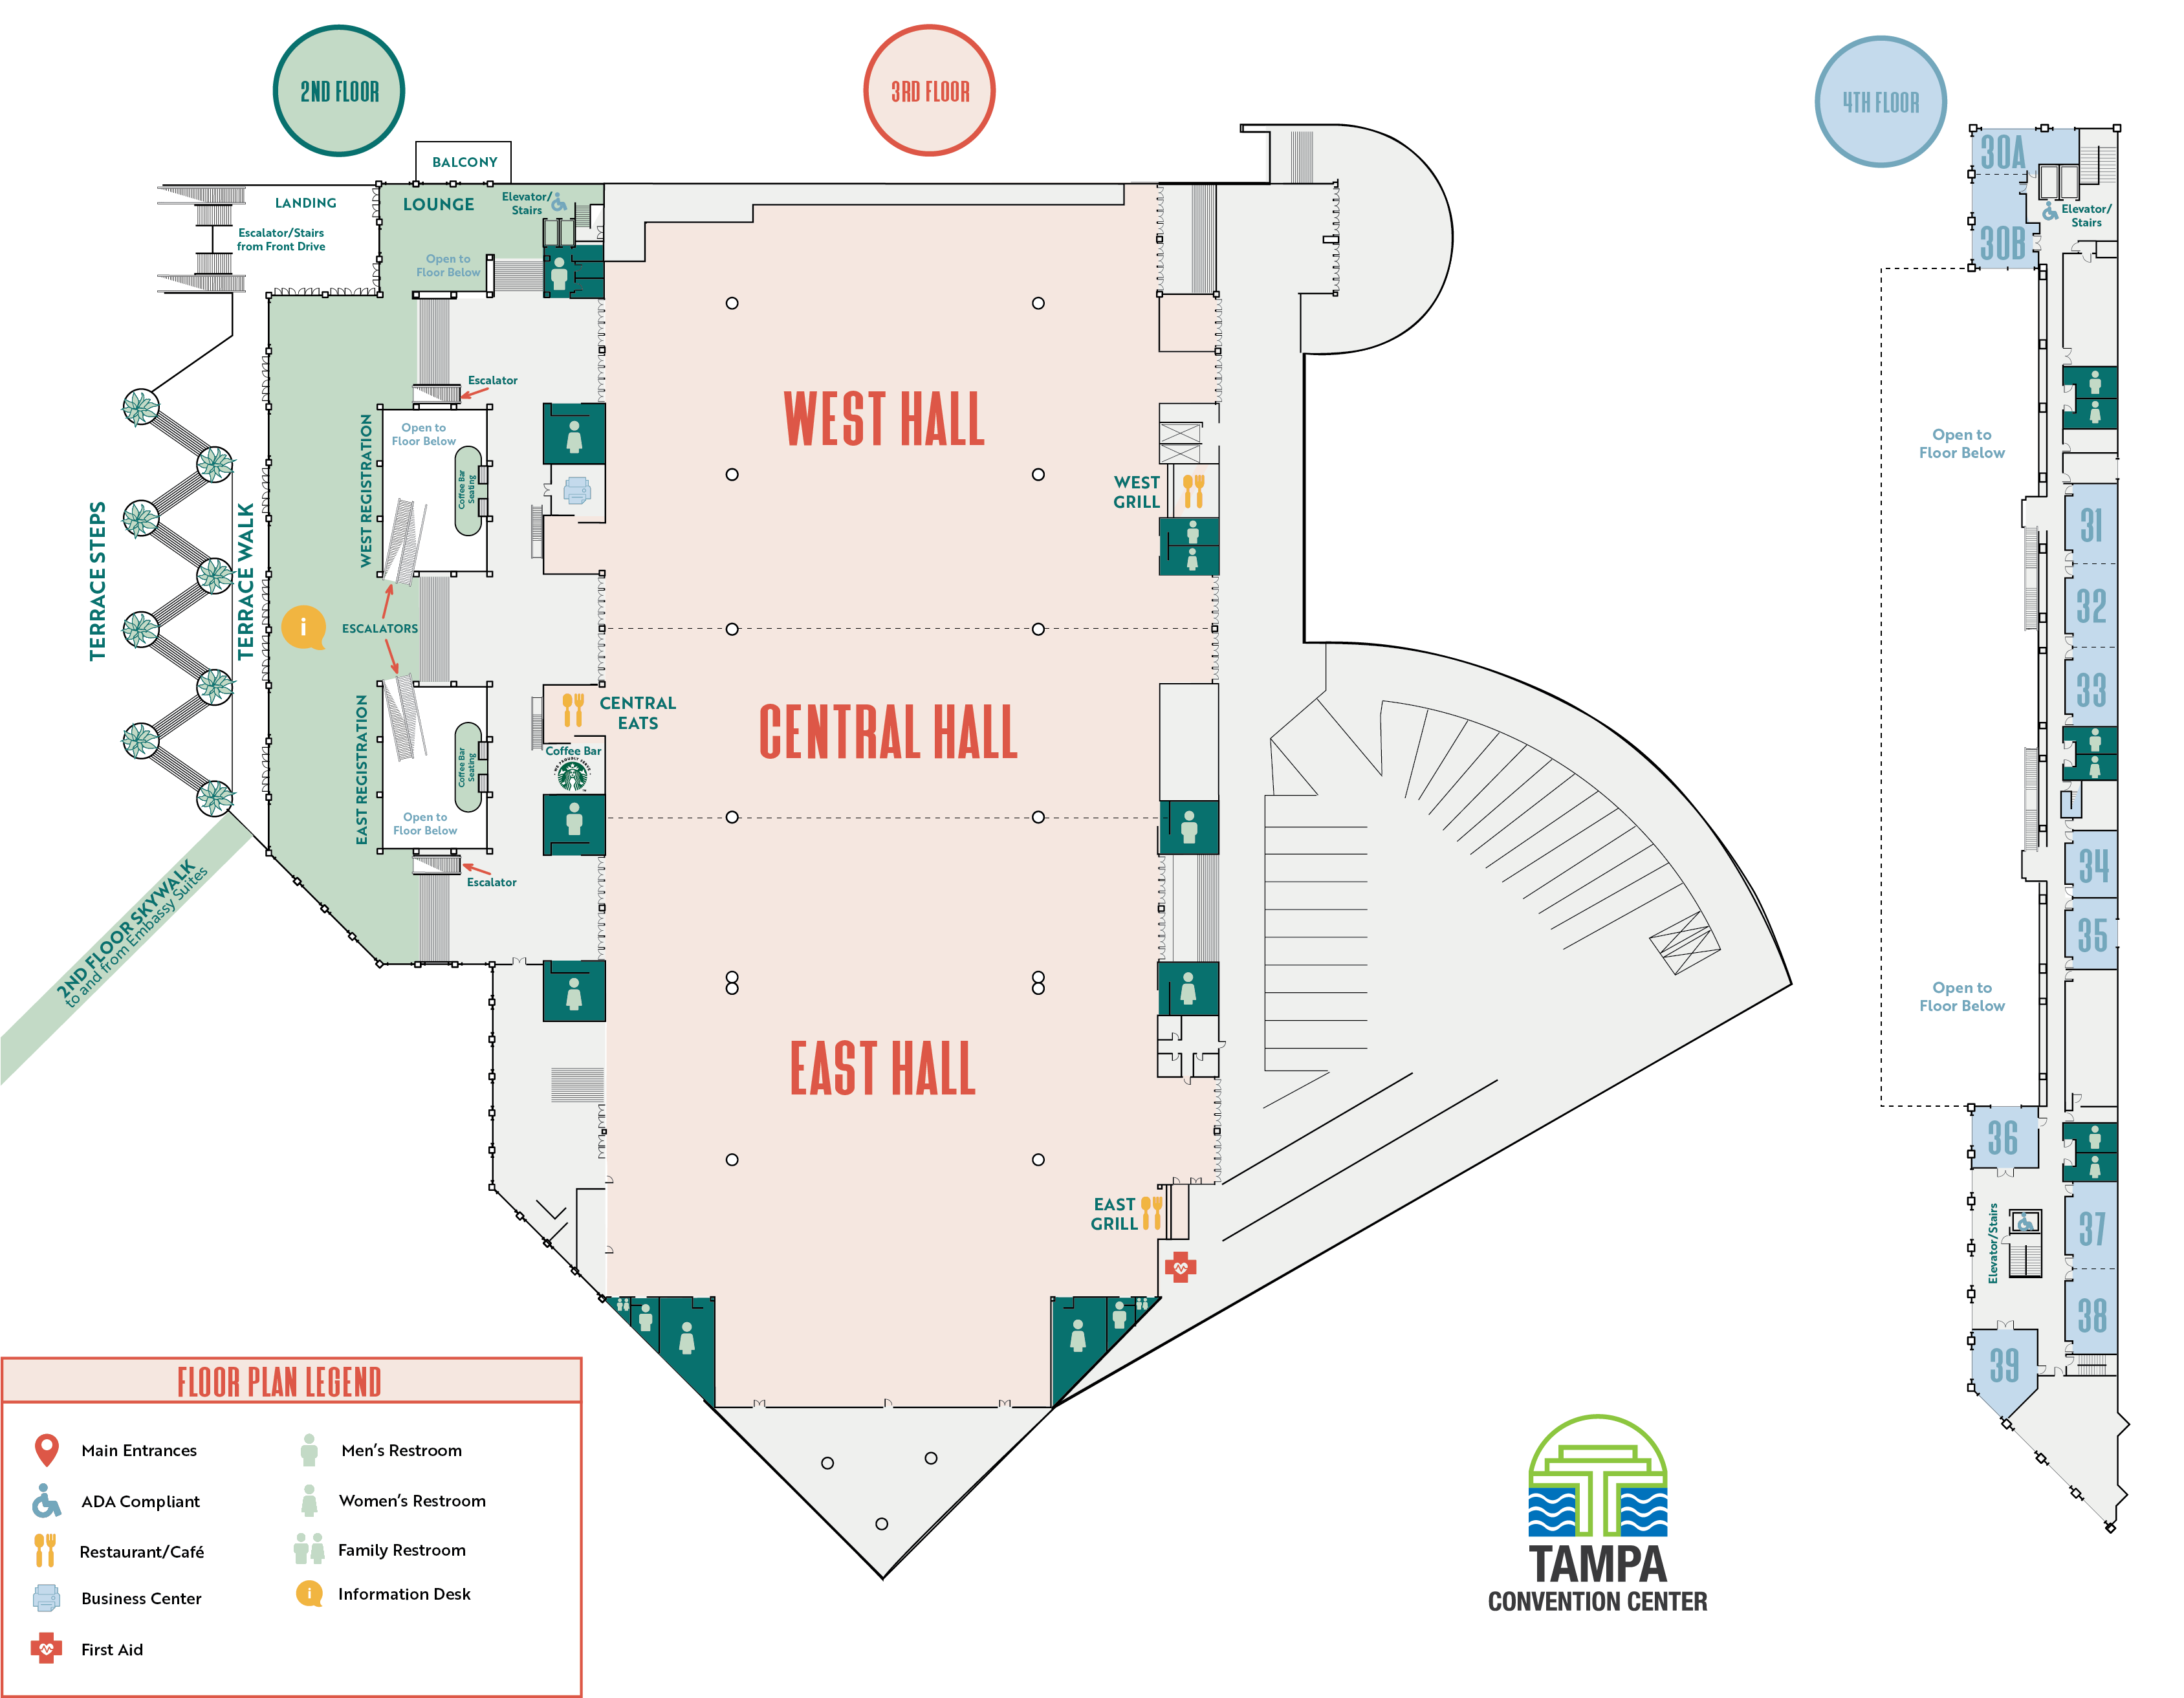 Tampa Convention Center Floorplan Level 2 YA by the Bay